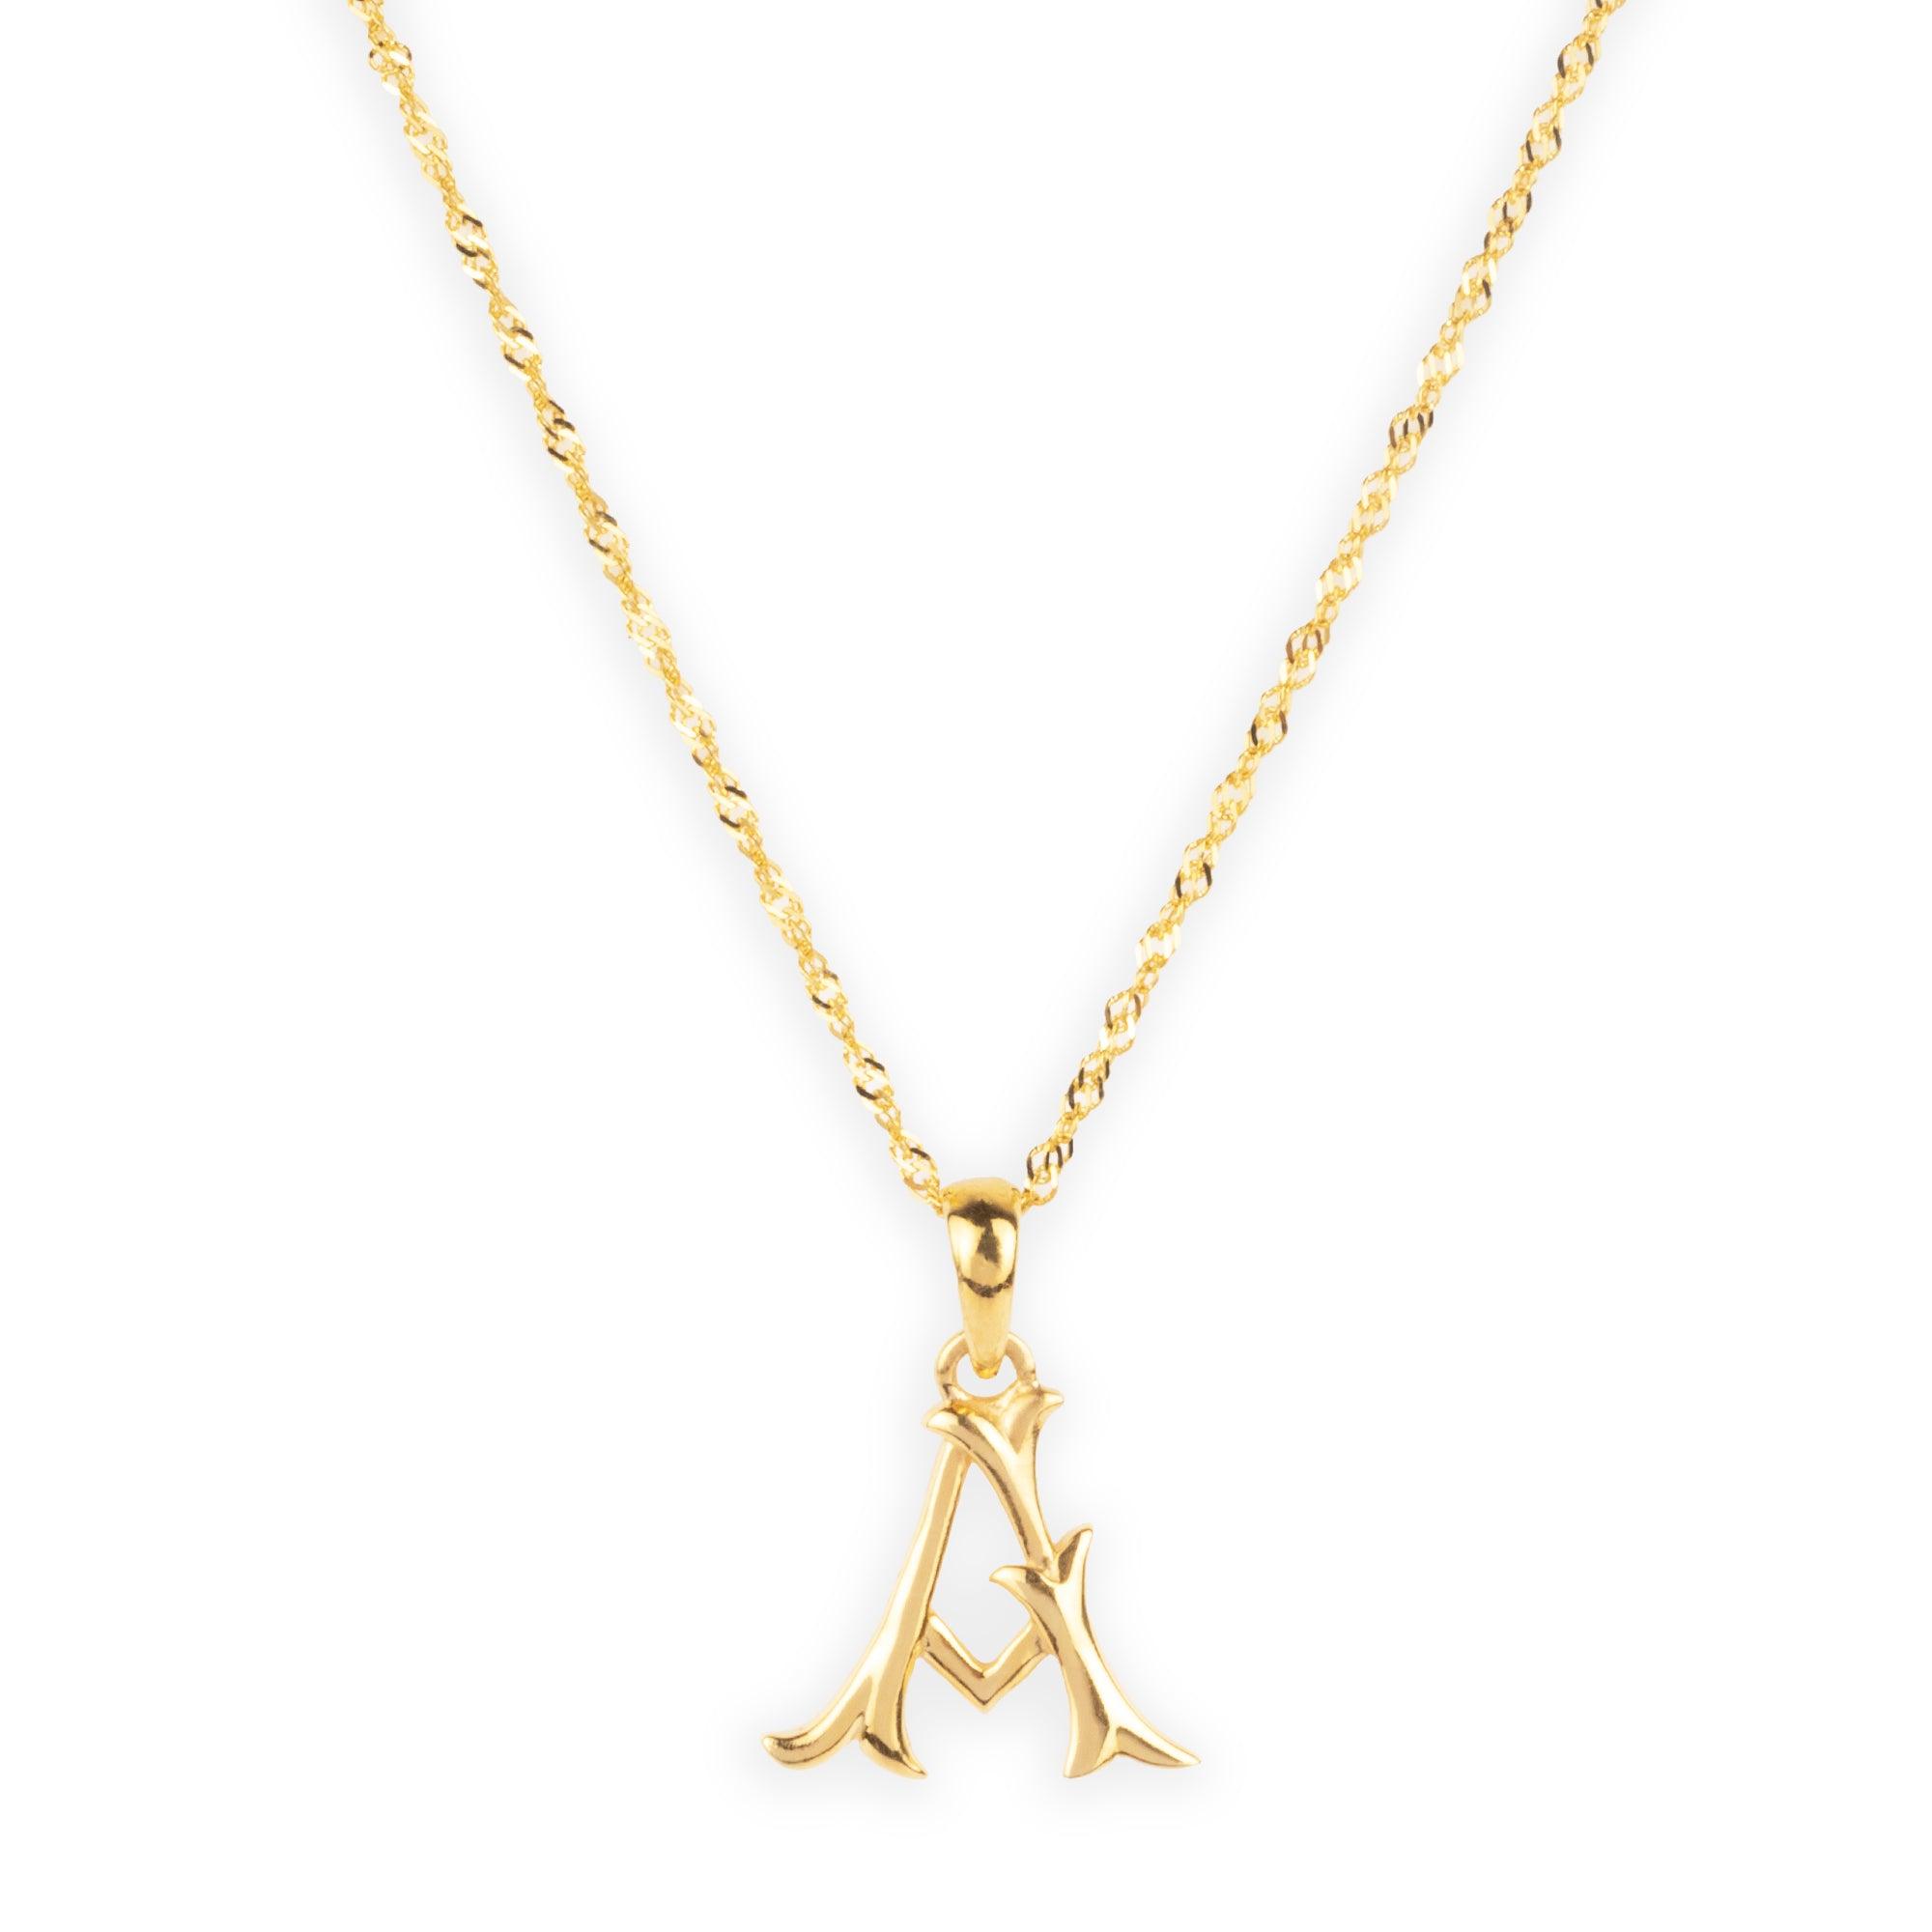 'A' 22ct Gold Initial Pendant P-7036 - Minar Jewellers